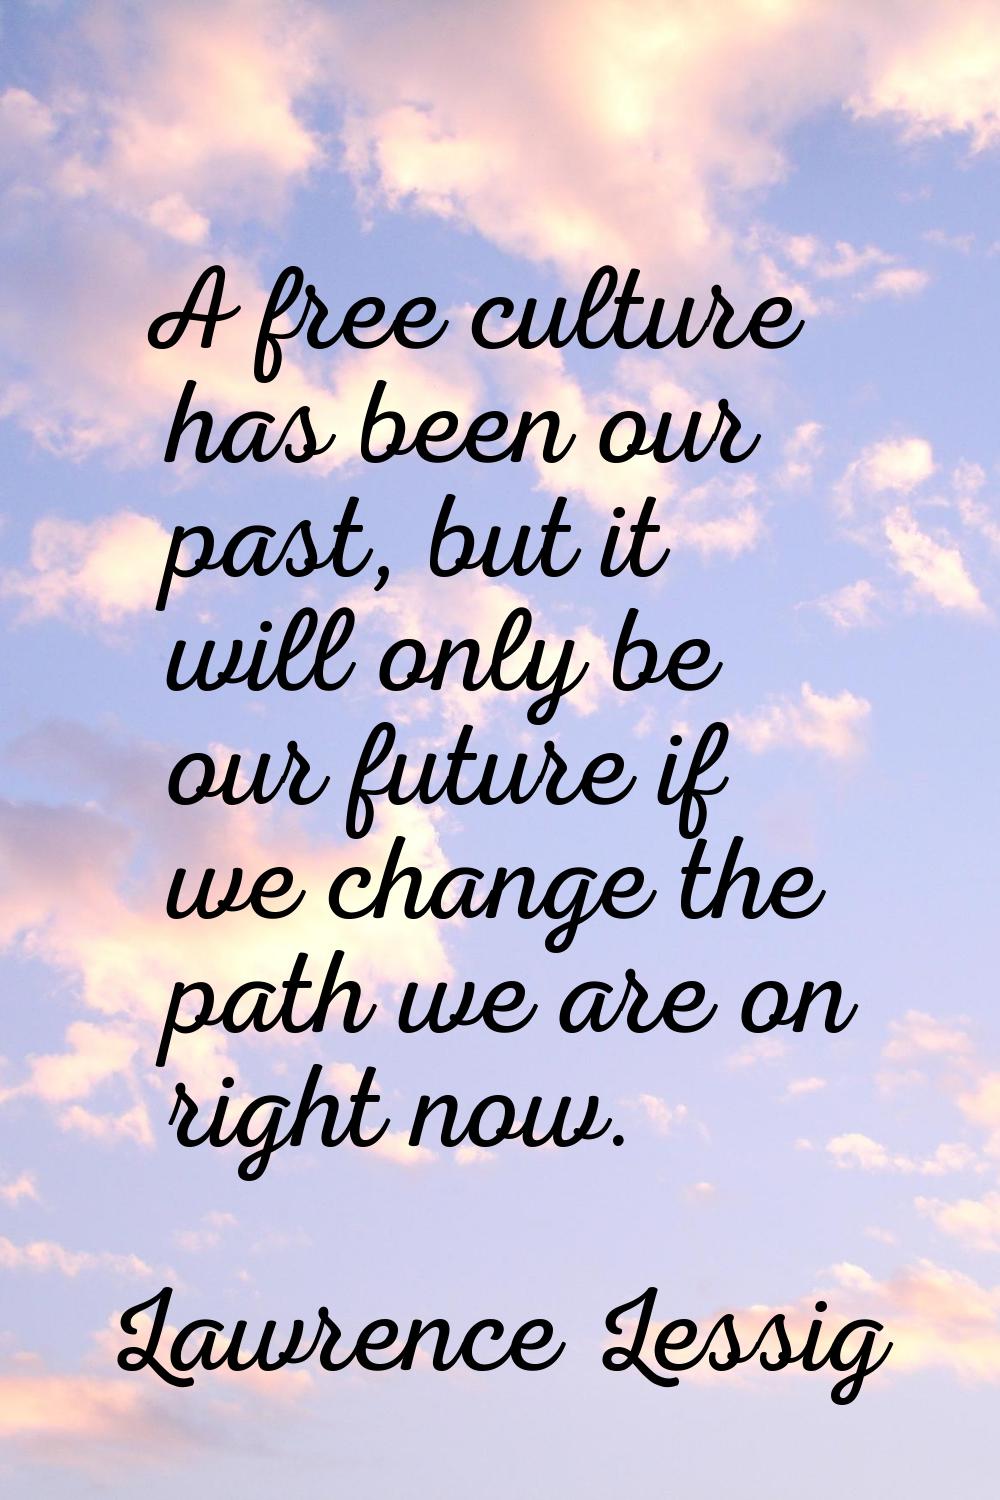 A free culture has been our past, but it will only be our future if we change the path we are on ri